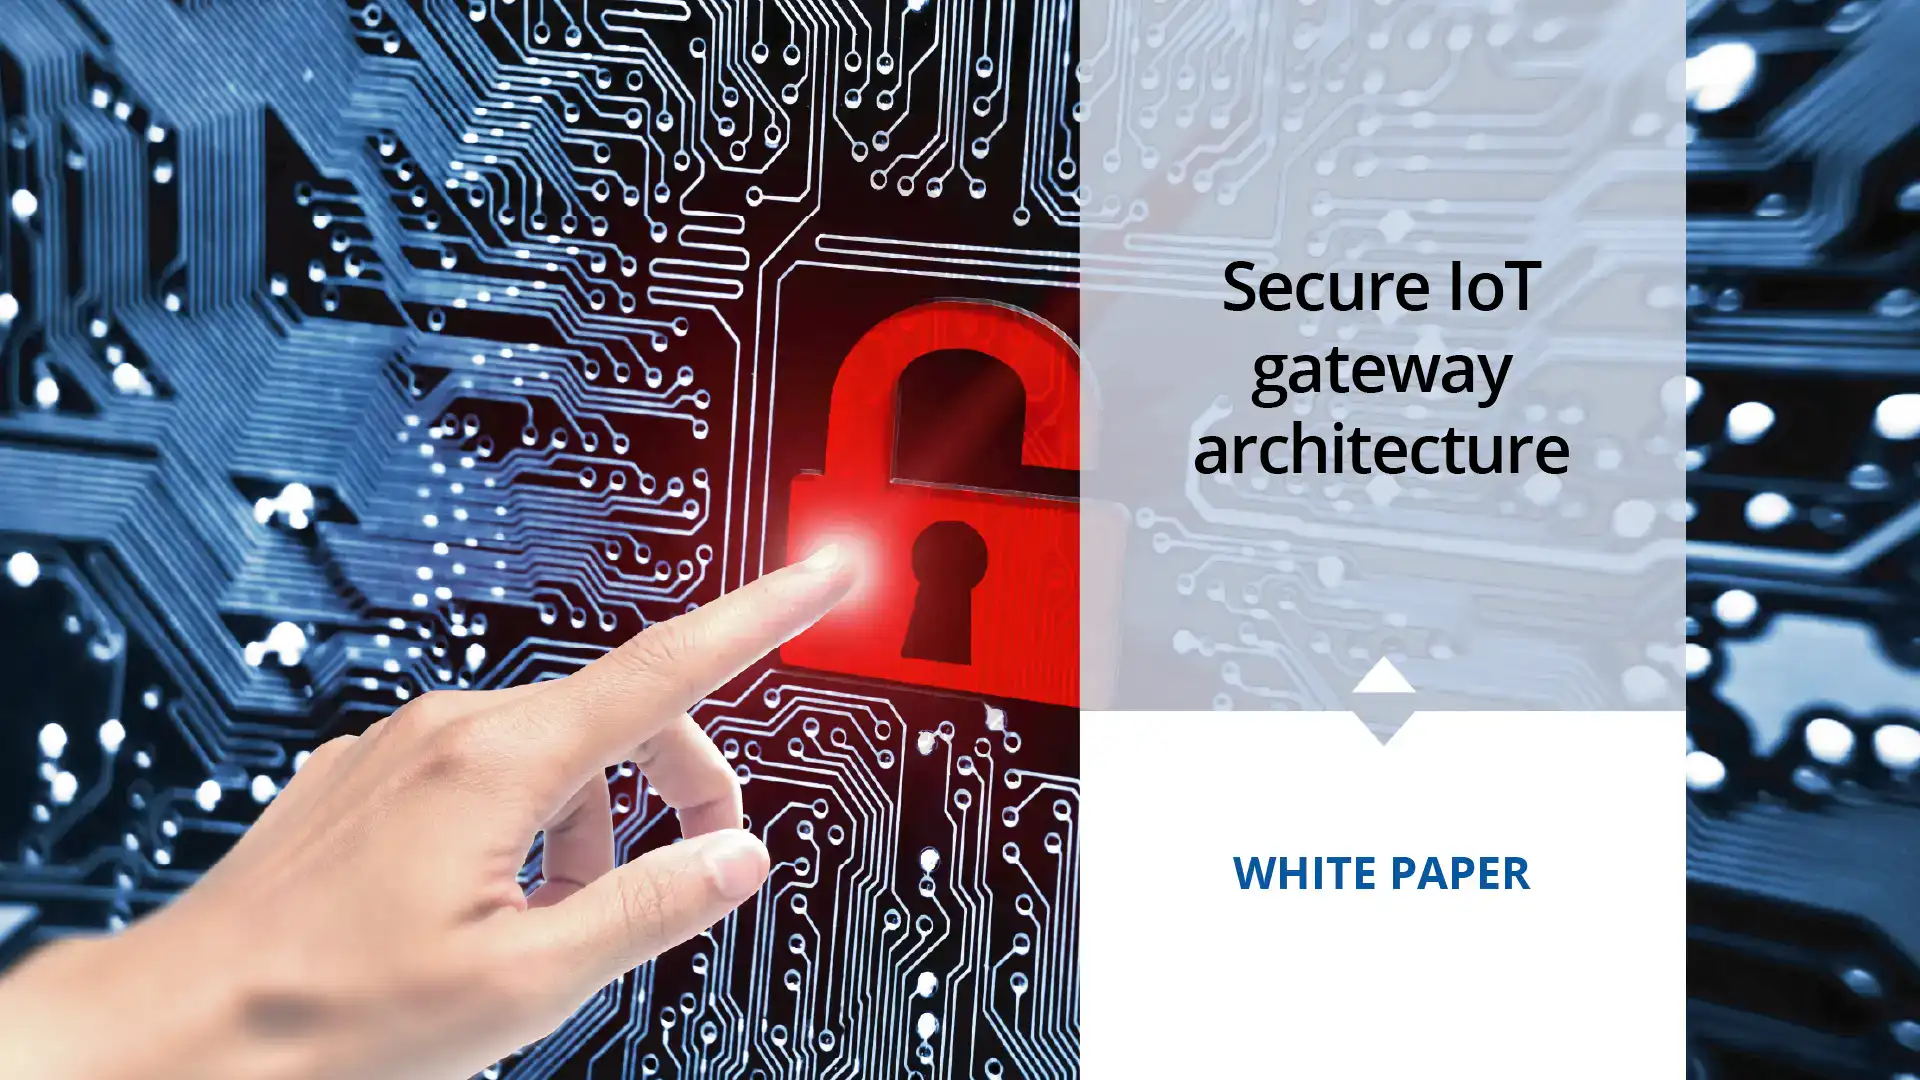 Secure IoT gateway architecture white paper page